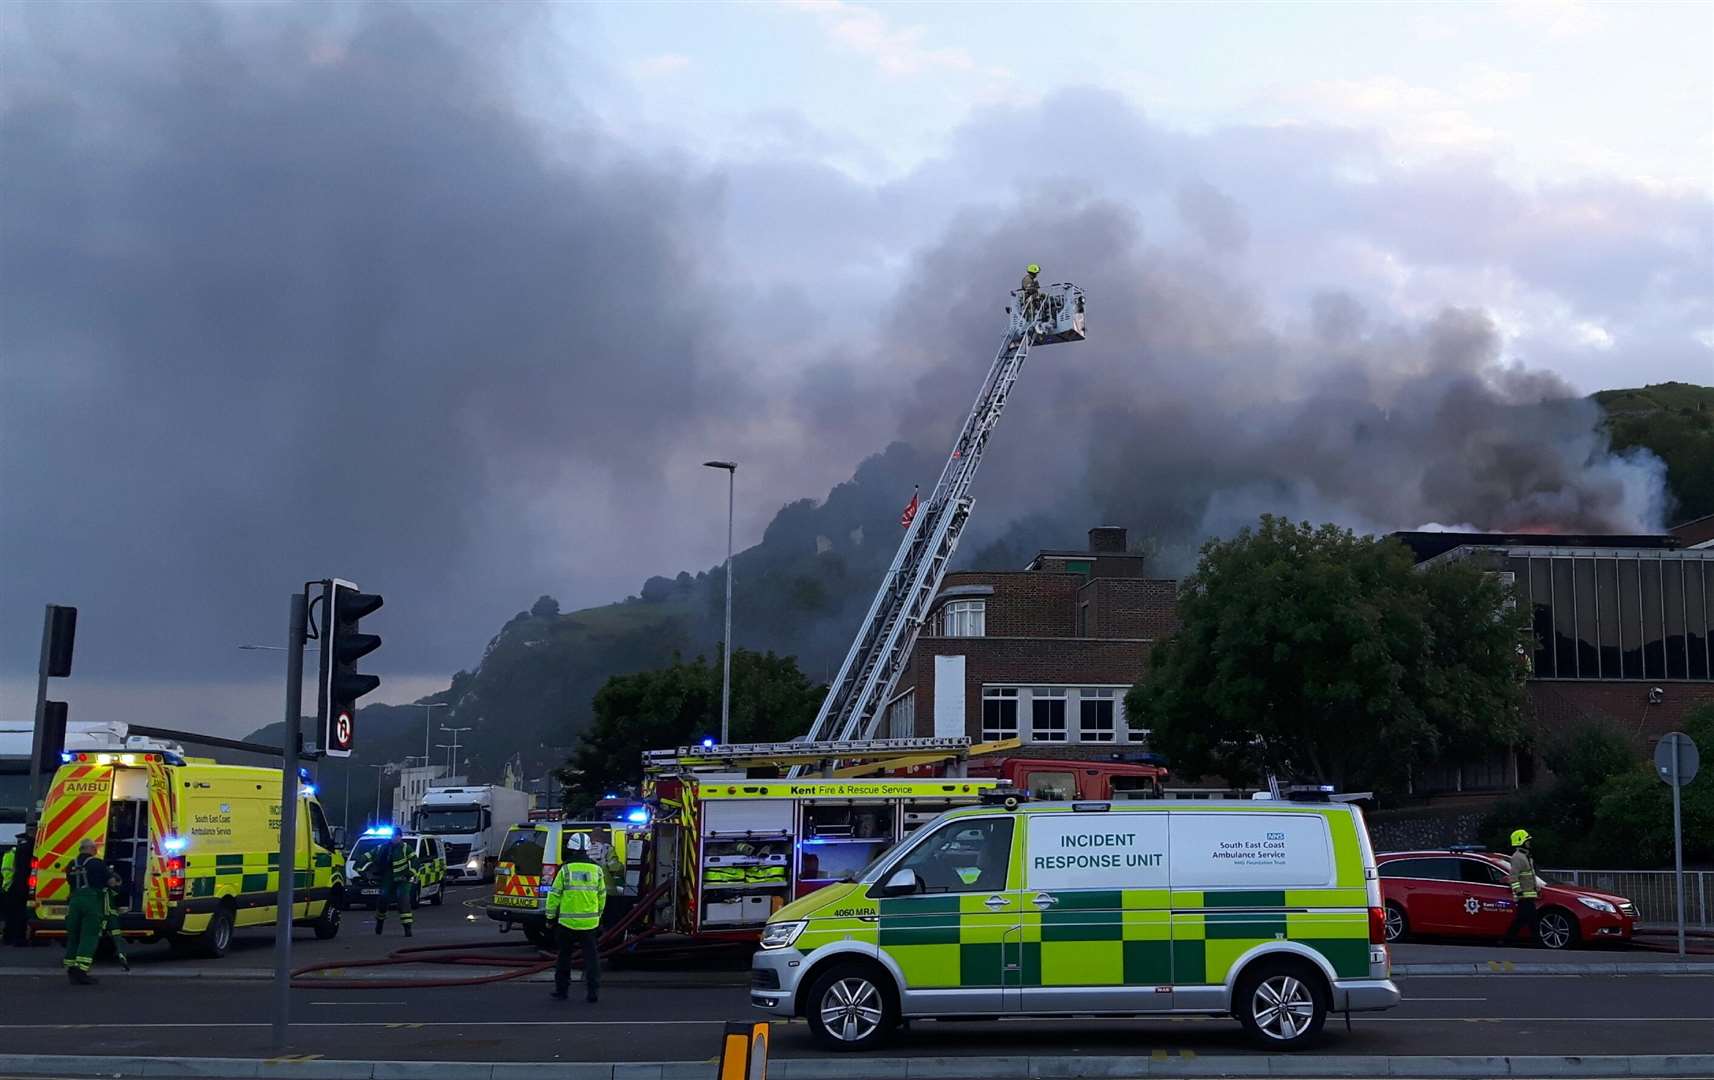 Efforts continued to put out the nightclub building fire. Picture: Sam Lennon